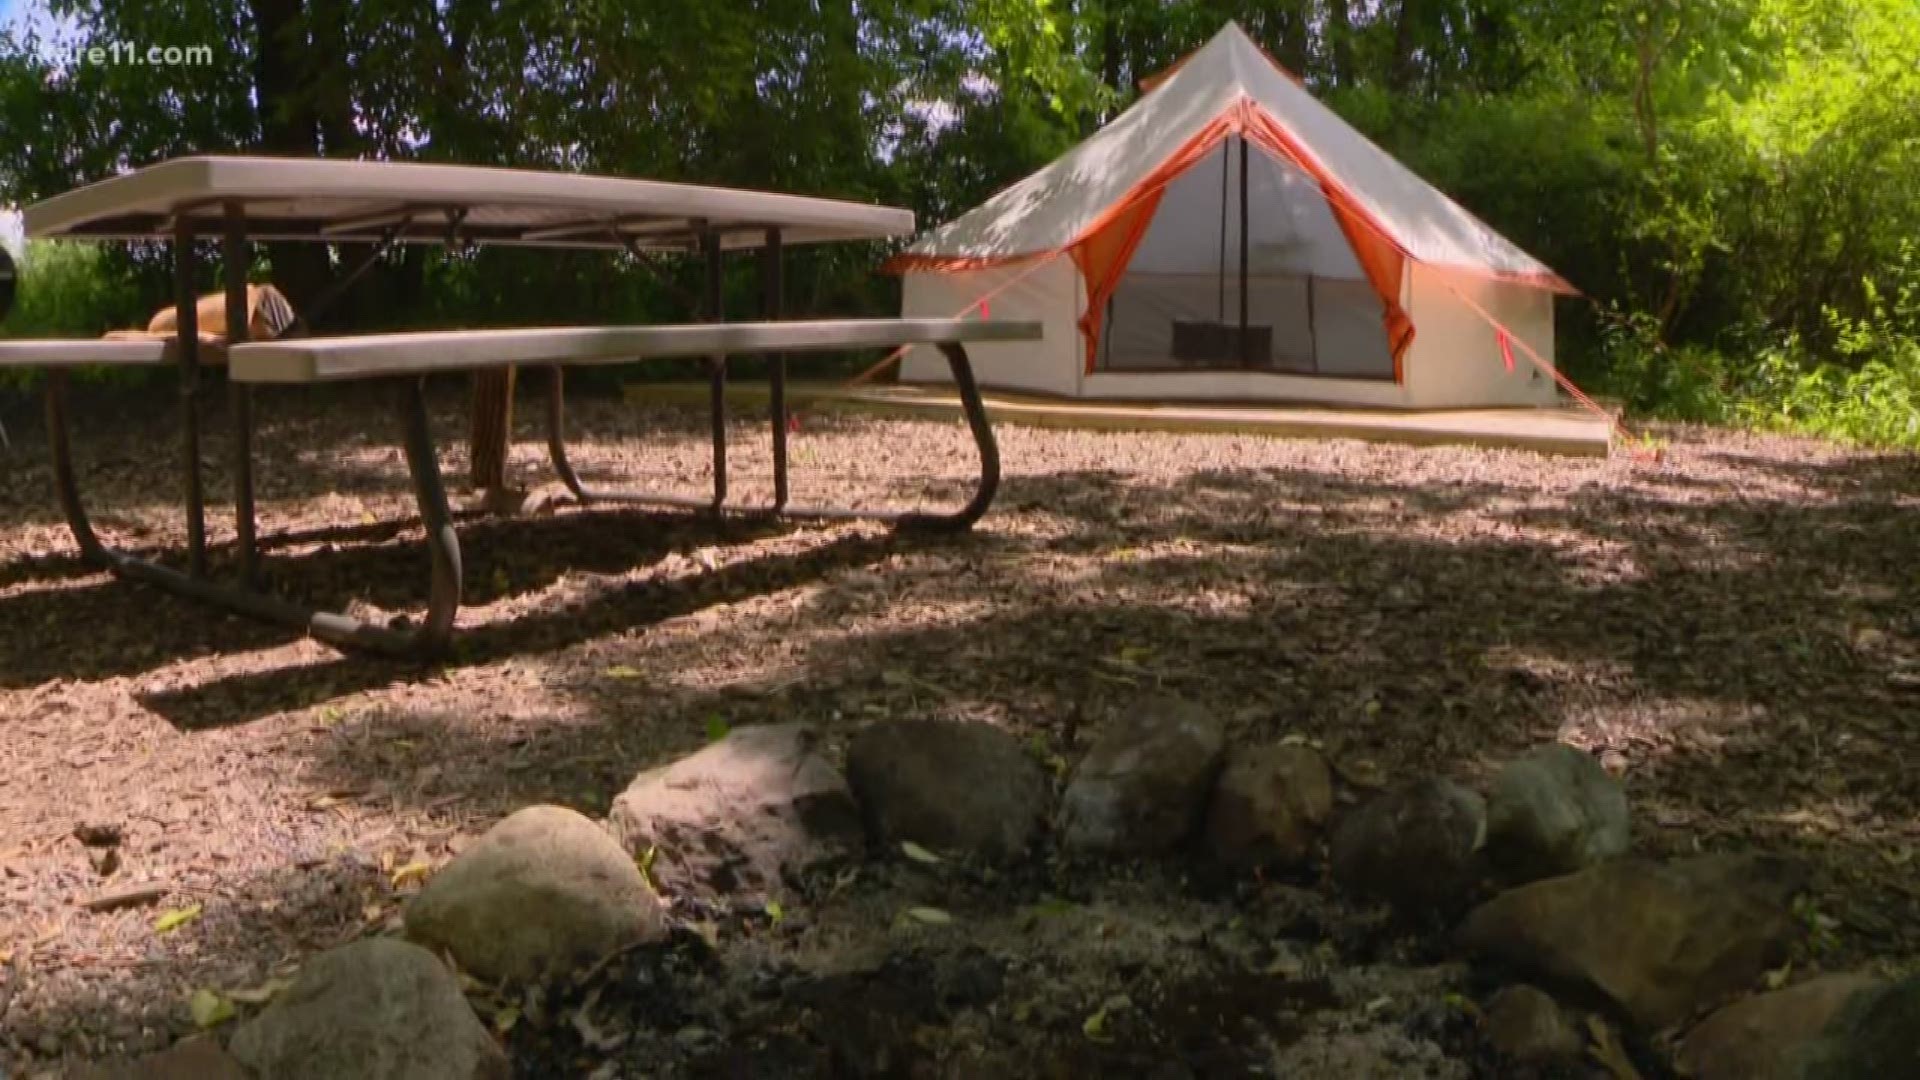 Hipcamp allows people to rent campsites or "glampsites."